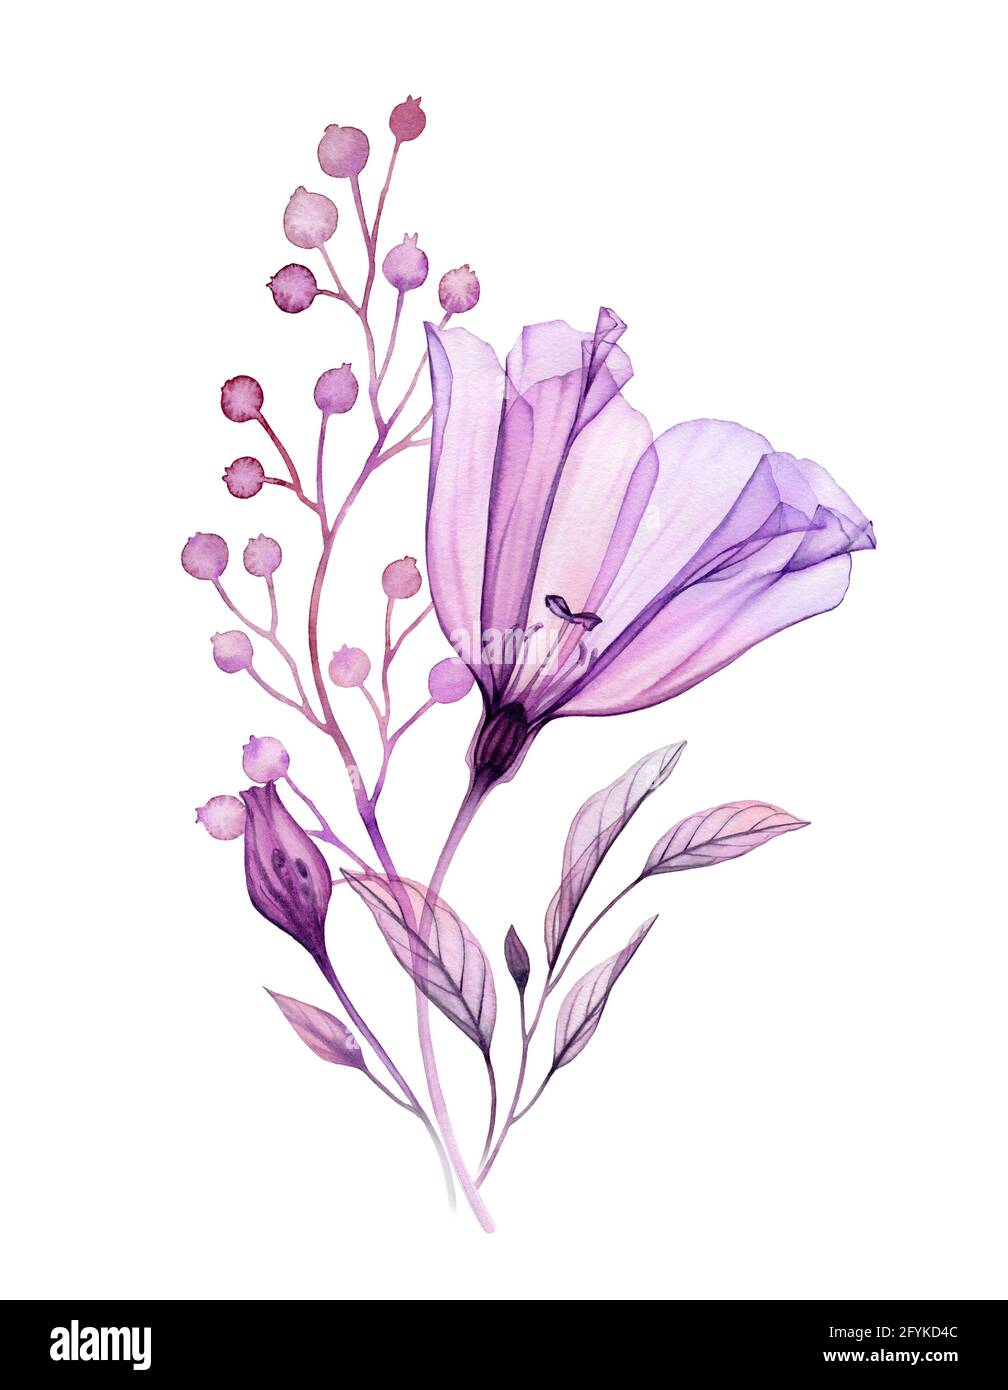 Watercolor floral bouquet in purple. Hand painted artwork with transparent violet flower and small berries isolated on white. Botanical illustration Stock Photo